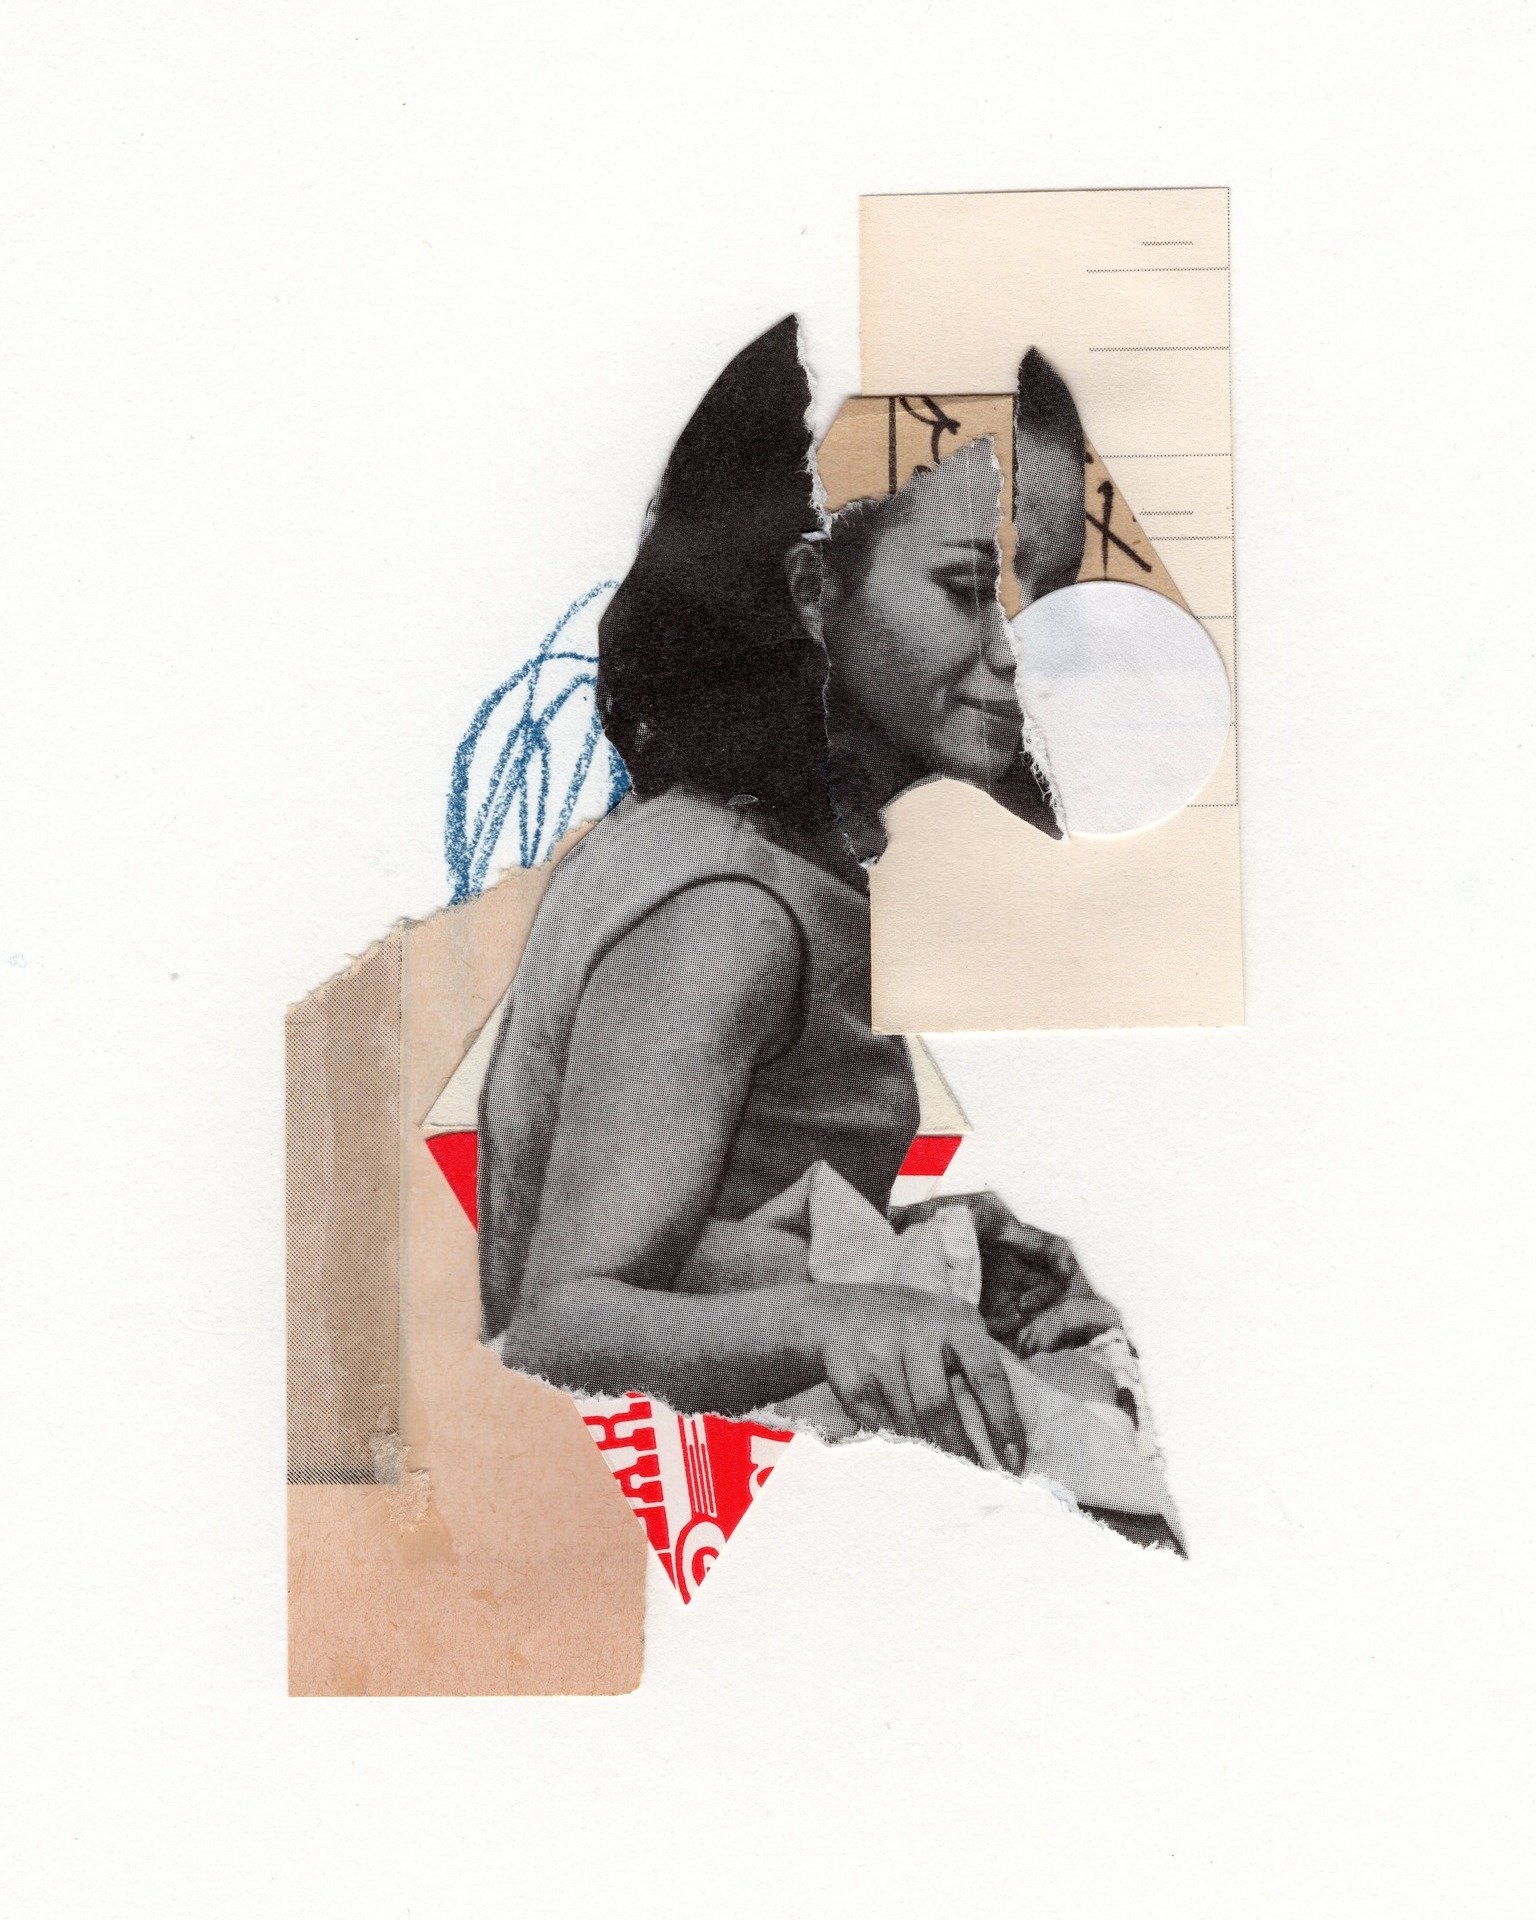 &quot;Year Book&quot; by @sophienewell_studio will be on display during the @collage_nebraska  exhibit at Hot Shops Art Center May 2-26. Please join us for the opening reception 6-8pm Saturday, May 4. 

 #collage #collageart